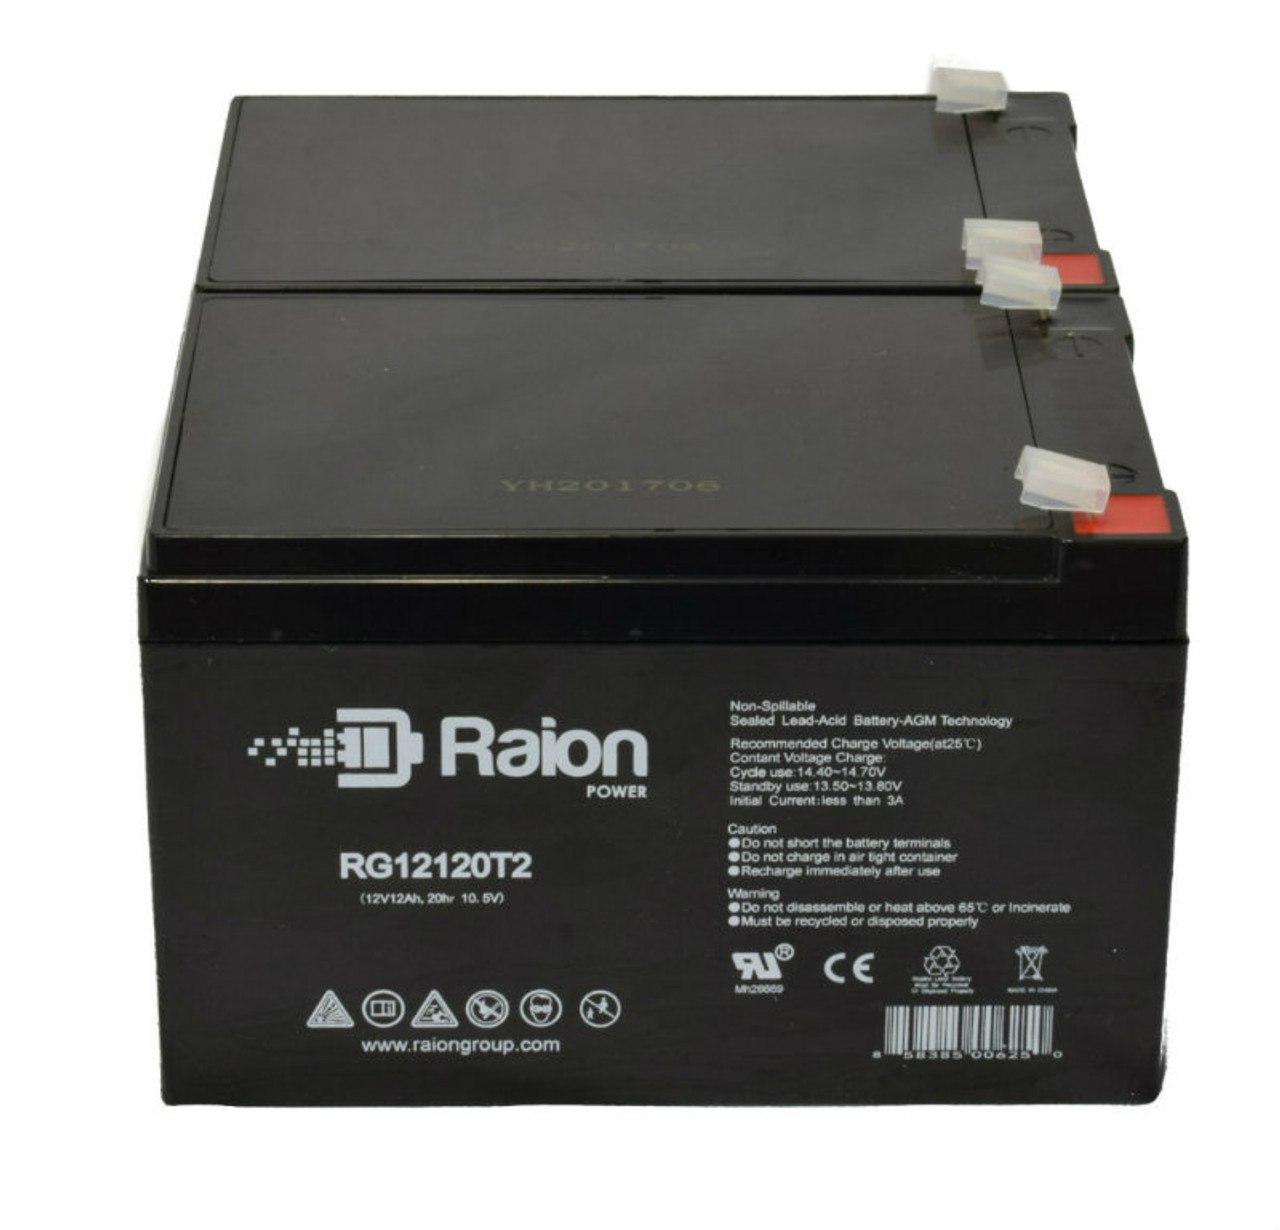 Raion Power RG12120T2 Replacement Emergency Light Battery for Sonnenschein 2145139800 - 2 Pack